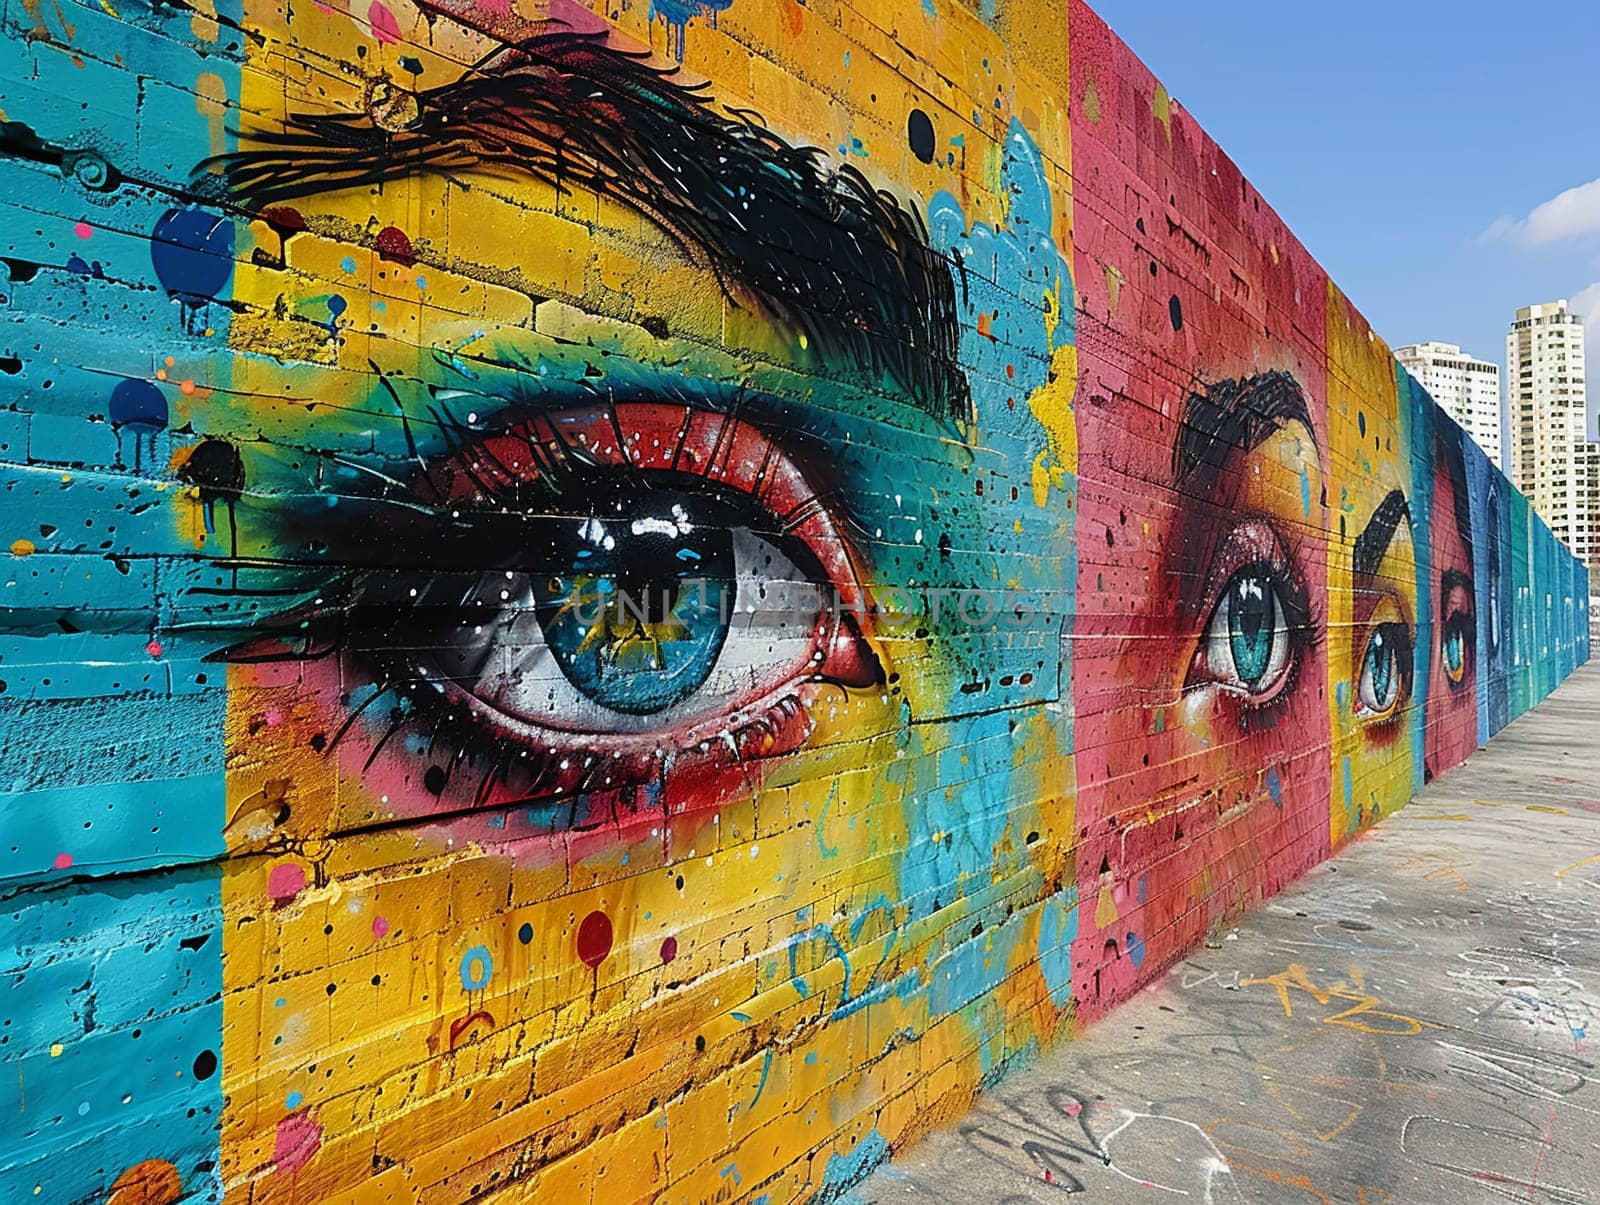 Vibrant graffiti wall in urban setting, capturing the essence of street art and culture.